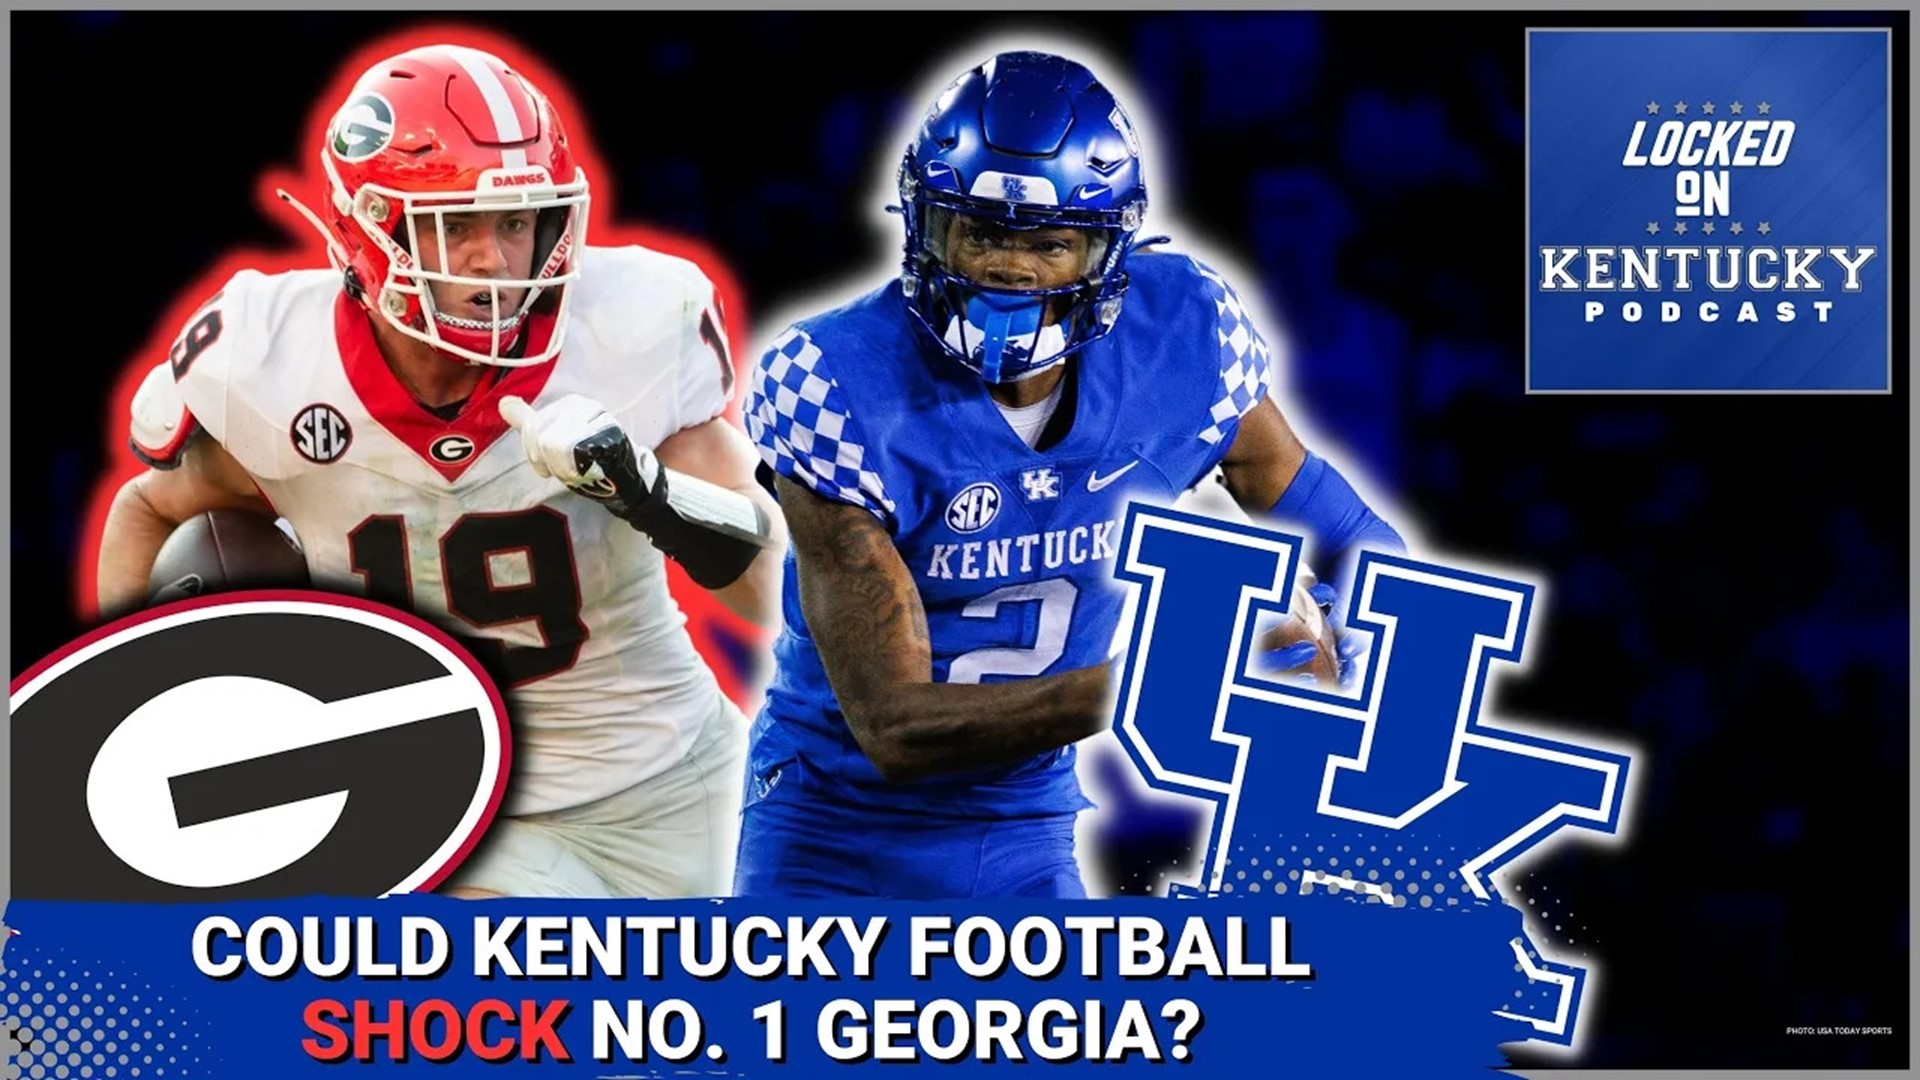 Kentucky football routed the Florida Gators this past weekend. Could they go on the road and shock the college football world by beating the Georgia Bulldogs?